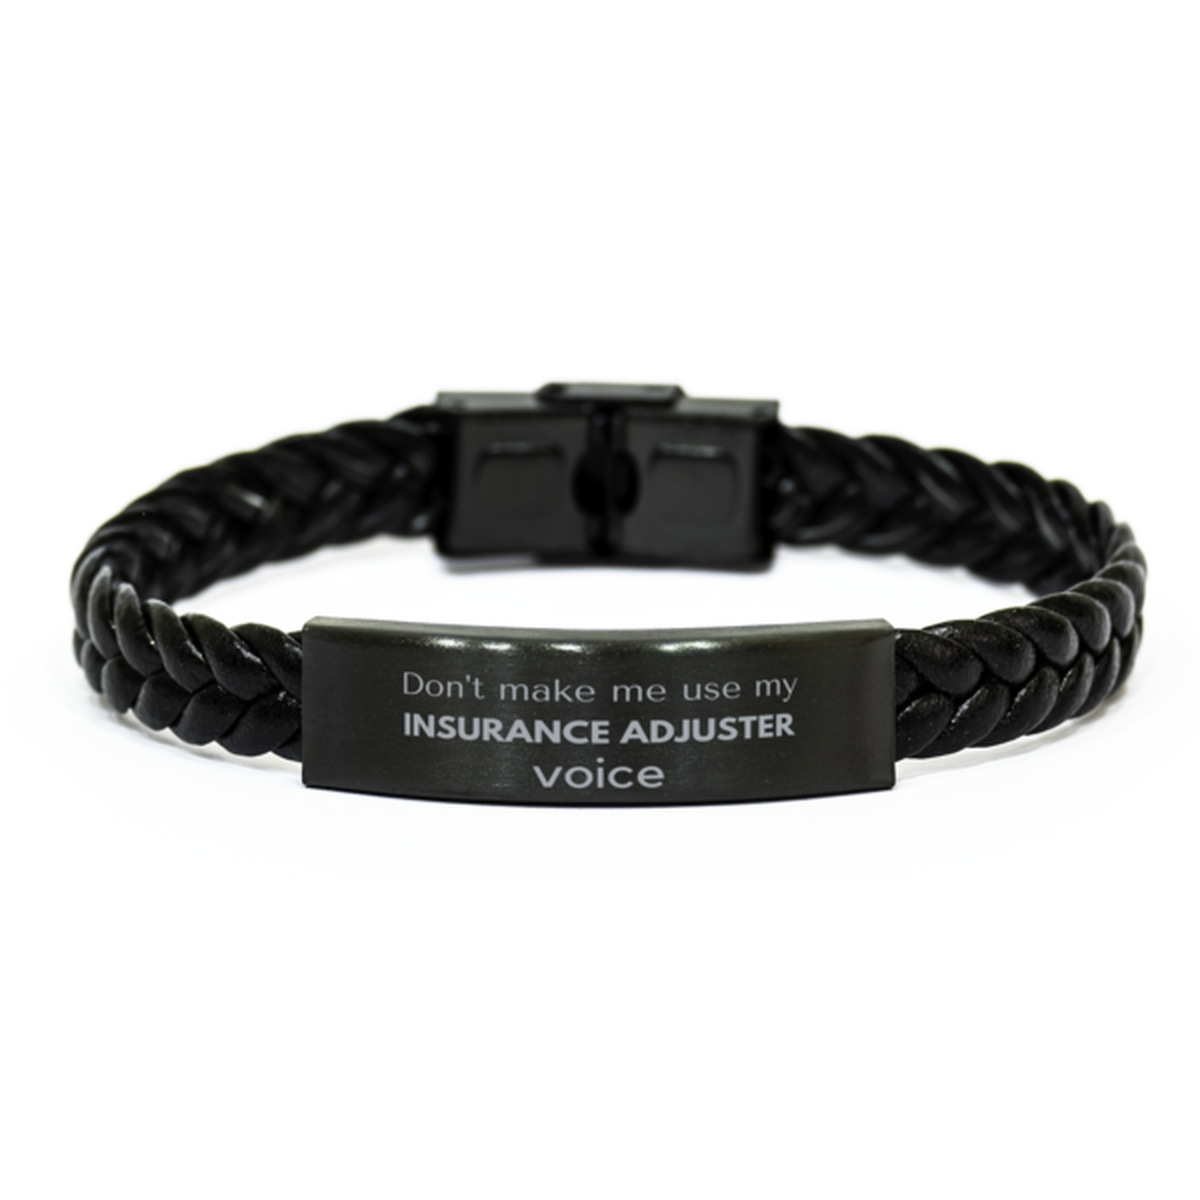 Don't make me use my Insurance Adjuster voice, Sarcasm Insurance Adjuster Gifts, Christmas Insurance Adjuster Braided Leather Bracelet Birthday Unique Gifts For Insurance Adjuster Coworkers, Men, Women, Colleague, Friends